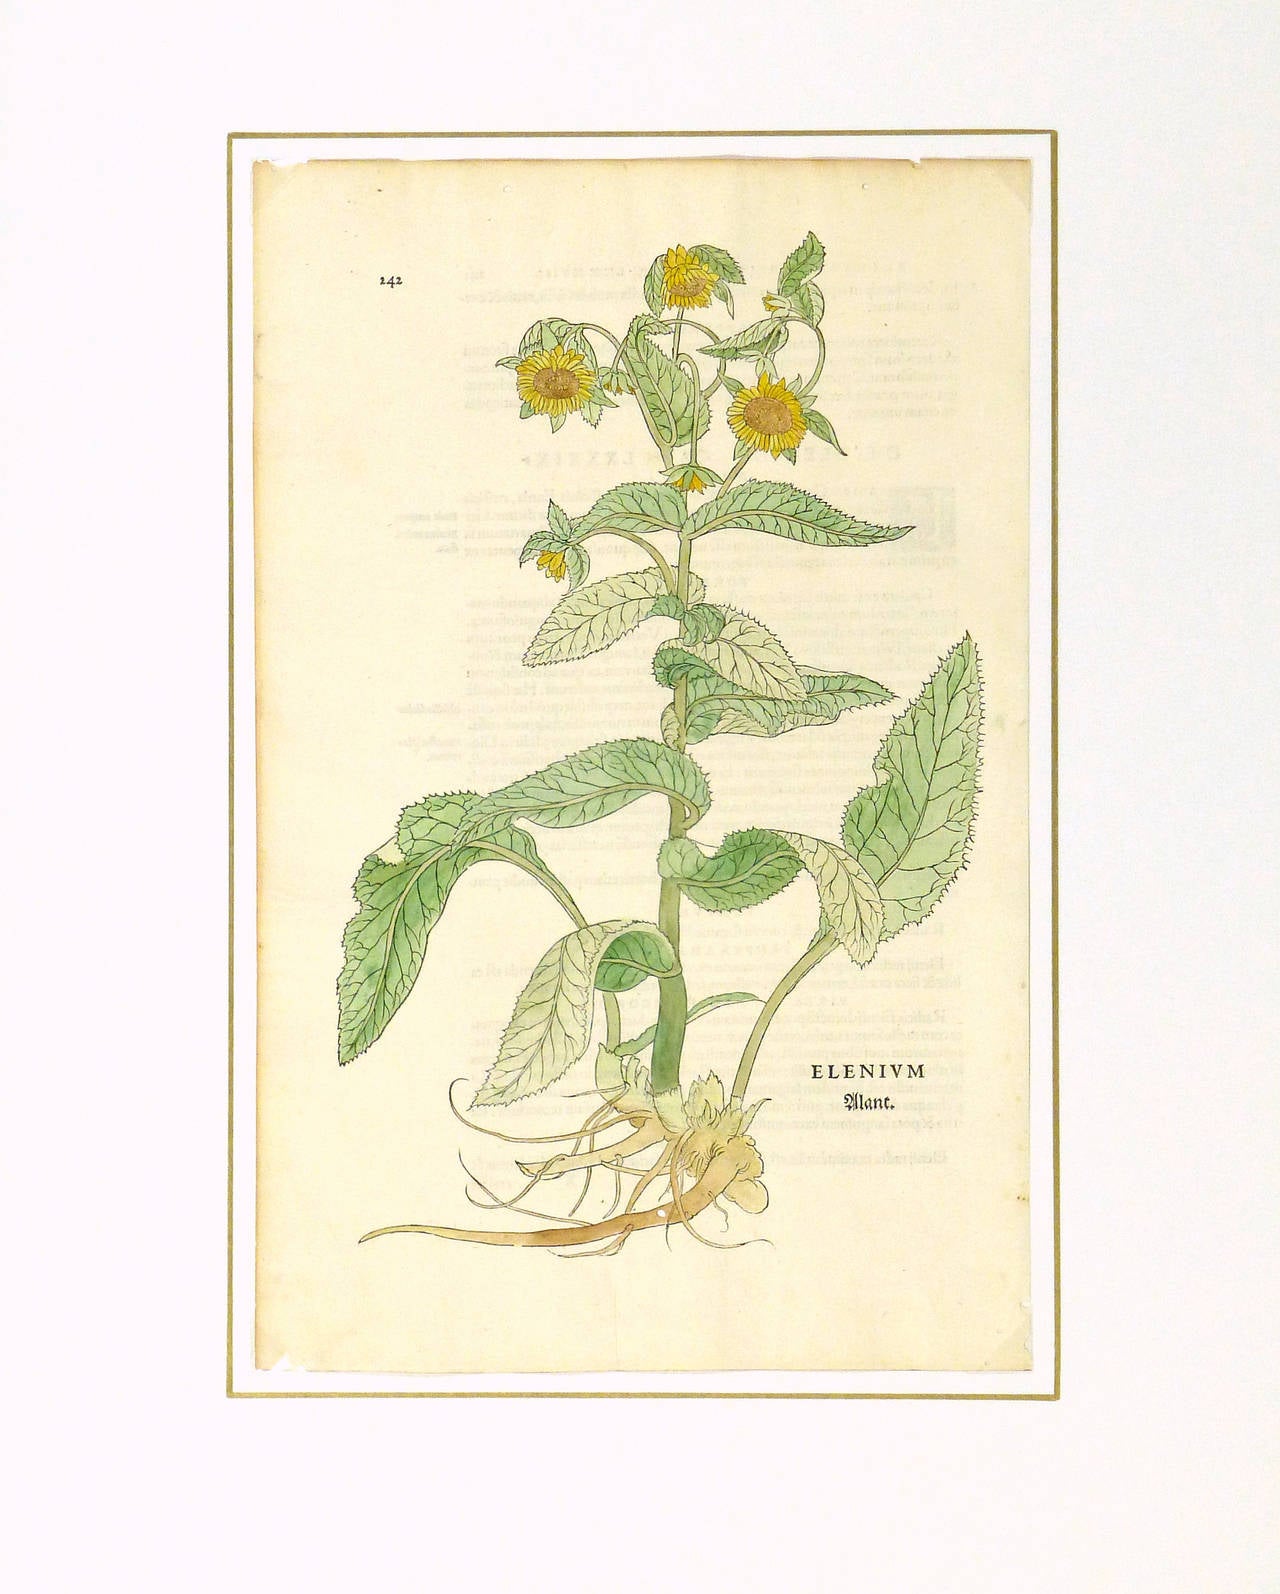 Amazing over 450 year old antique hand wood cut of a sunflower specimen by Leonart Fuchs (1501-1566), 1542. It is considered the first printed representation of the sunflower. Original hand color.

Original antique artwork on paper displayed on a